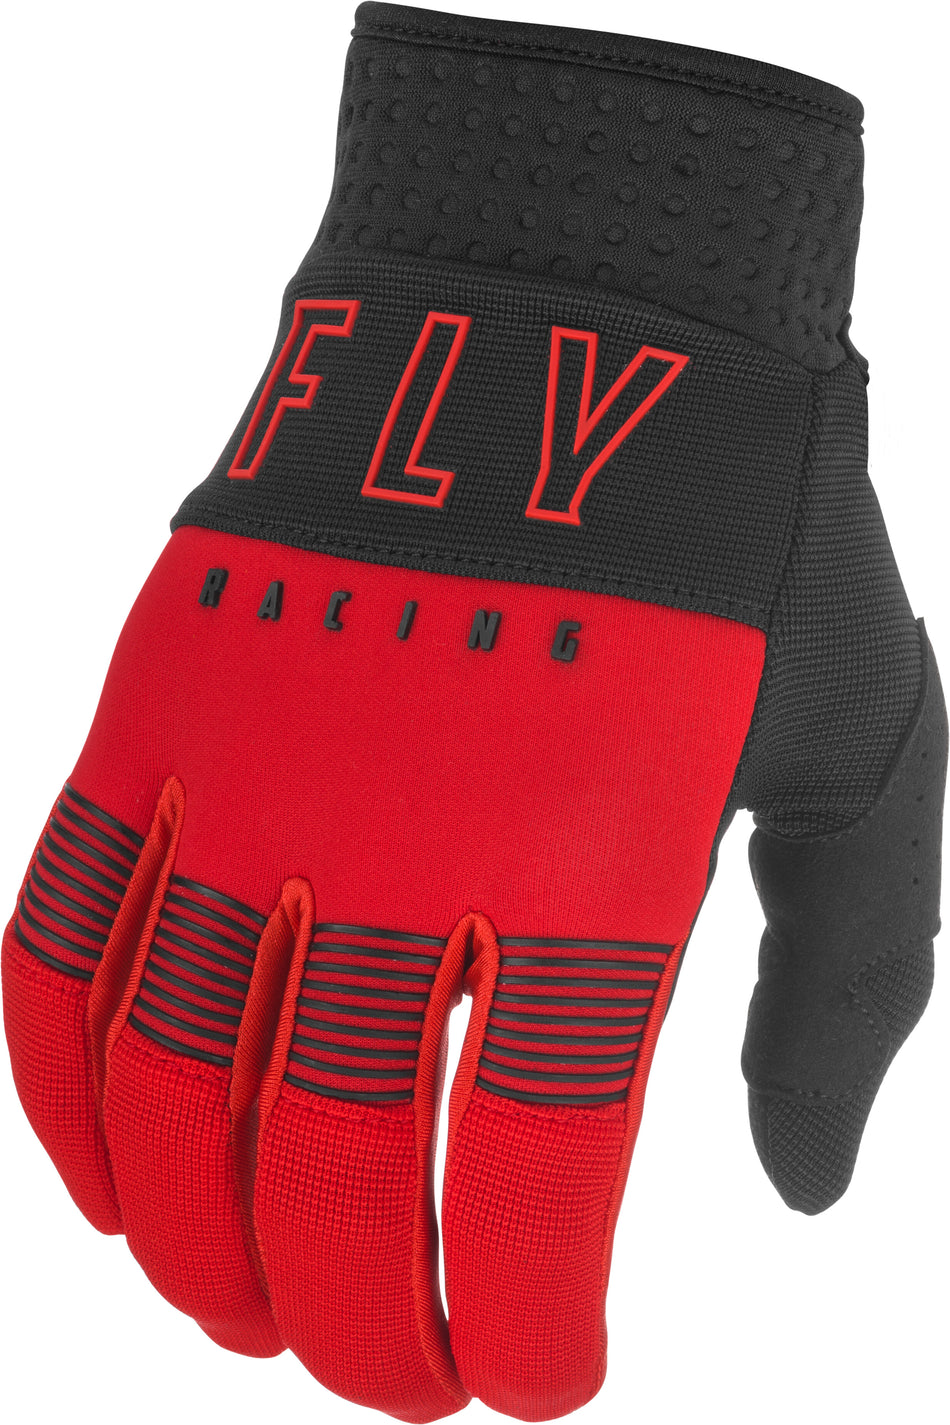 FLY RACING Youth F-16 Gloves Red/Black Sz 01 374-91201